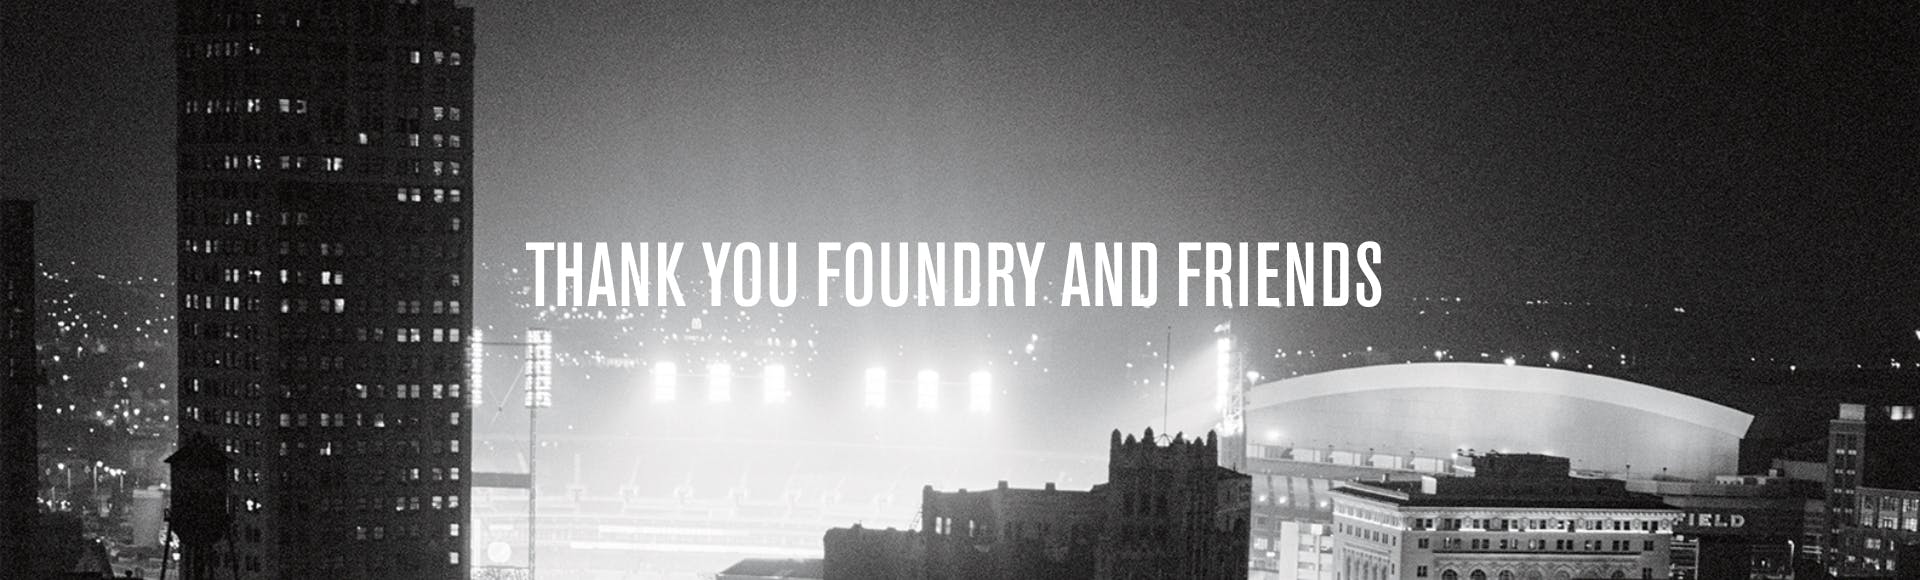 Thank You Foundry and Friends